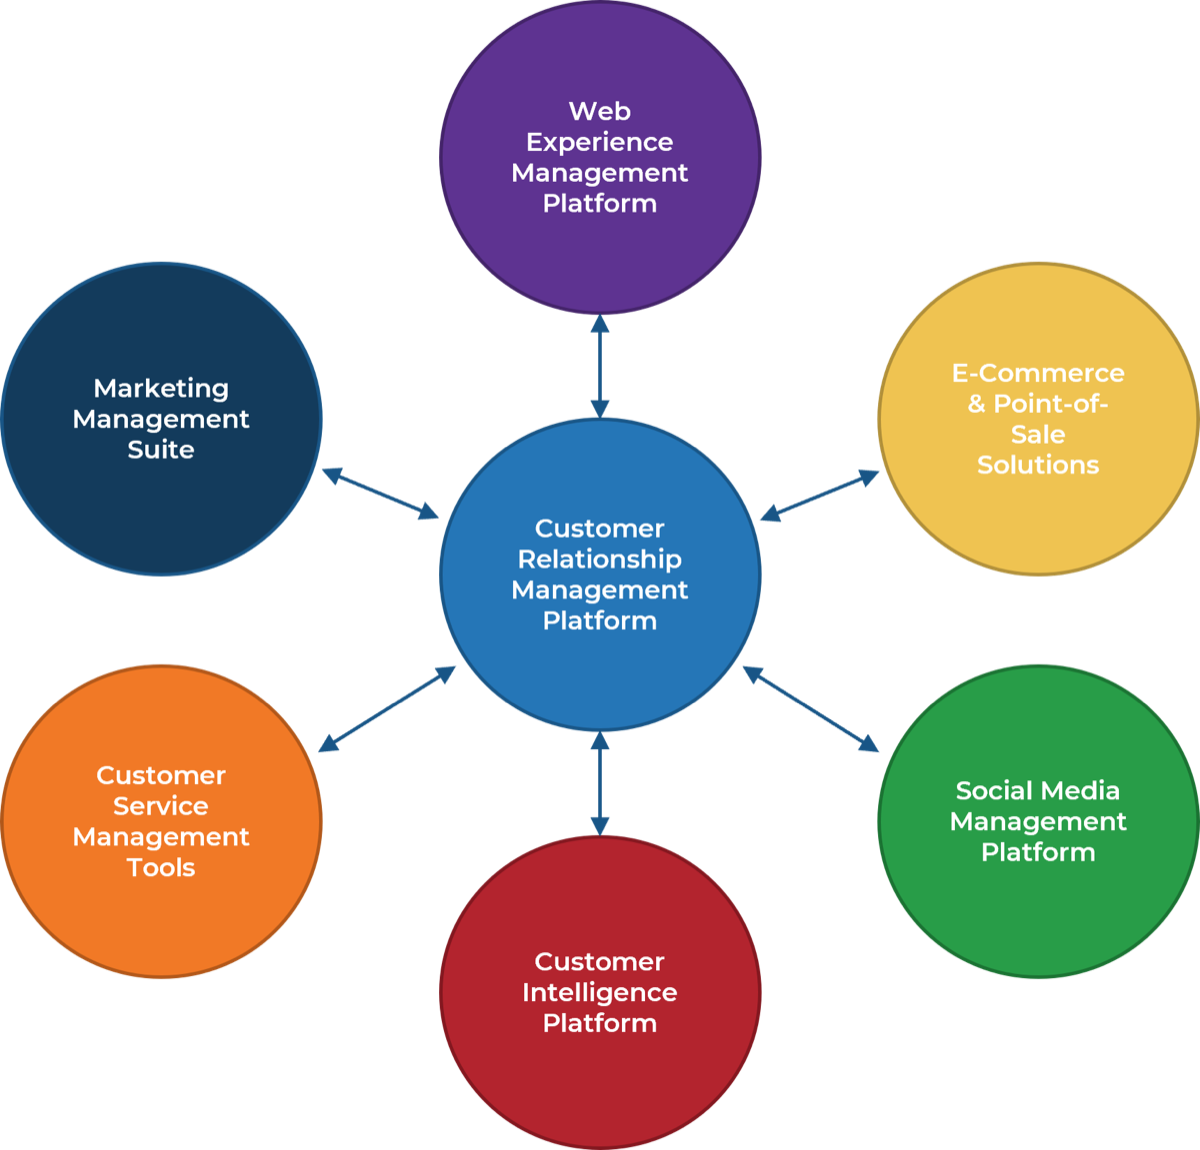 At the center is 'Customer Relationship Management Platform' surrounded by 'Web Experience Management Platform', 'E-Commerce & Point-of-Sale Solutions', 'Social Media Management Platform', 'Customer Intelligence Platform', 'Customer Service Management Tools', and 'Marketing Management Suite'.